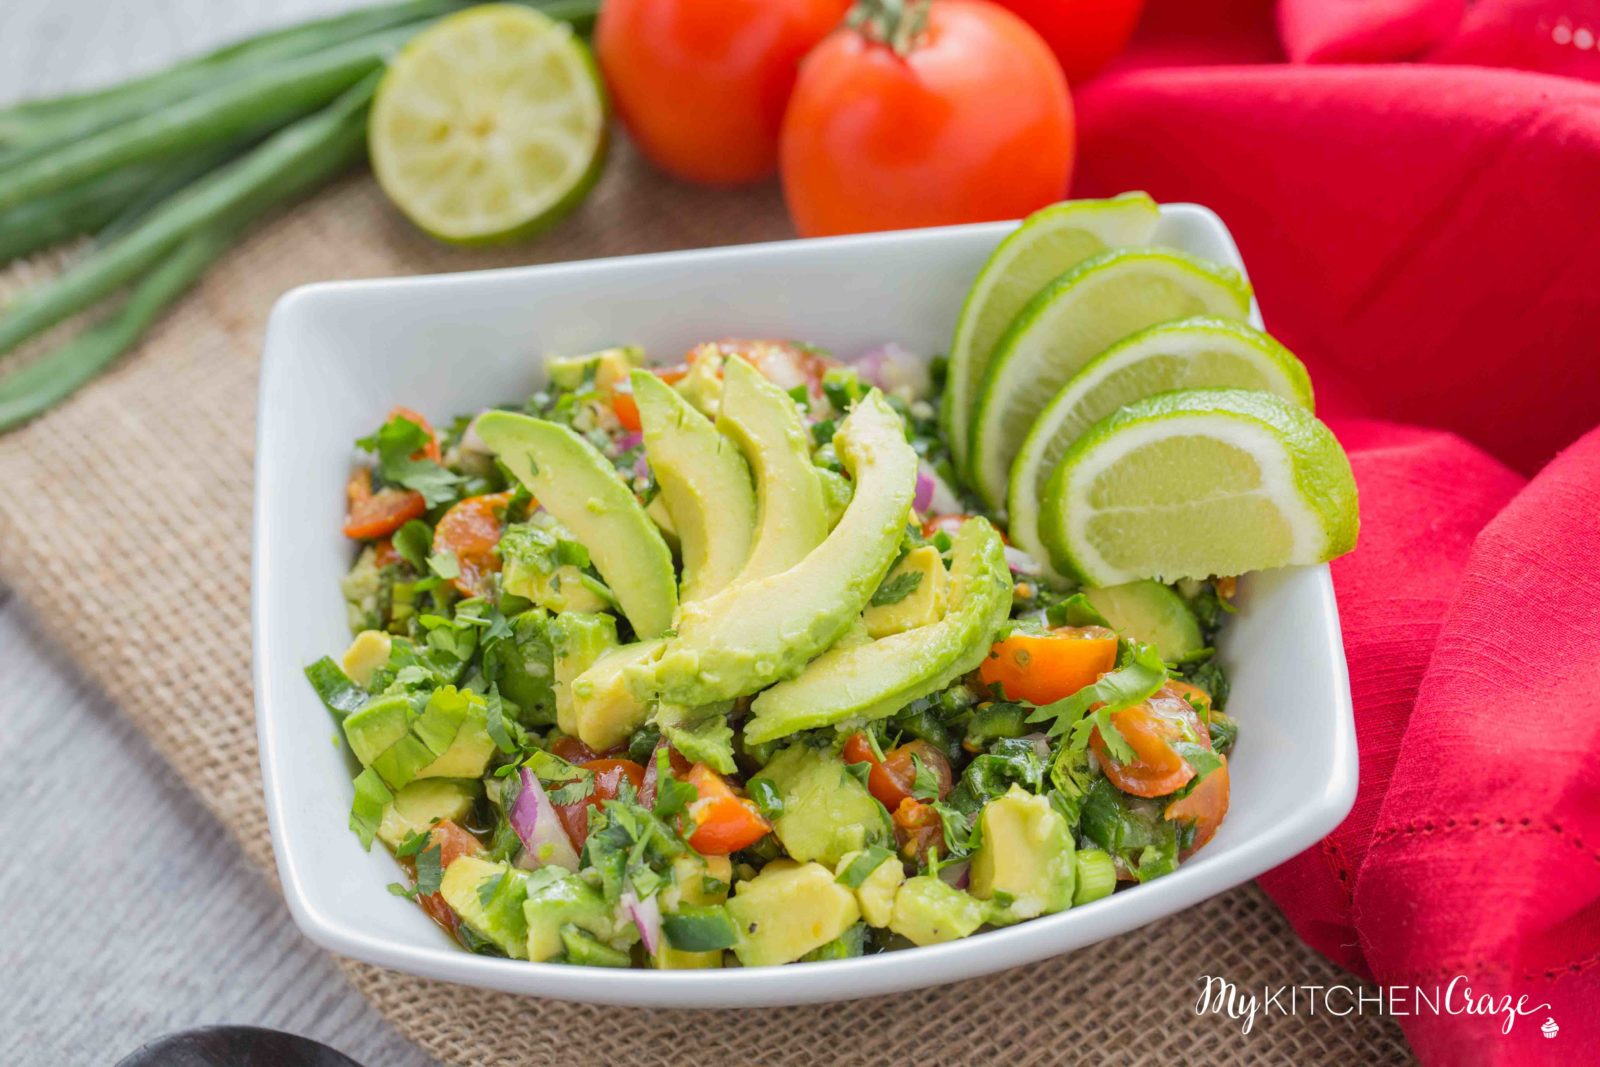 Avocado Salad_-3Avocado Salad ~ mykitchencraze.com ~ Enjoy this easy and refreshing Avocado Salad as a side dish or a main entree. Either way it's easy to make and tastes delicious!